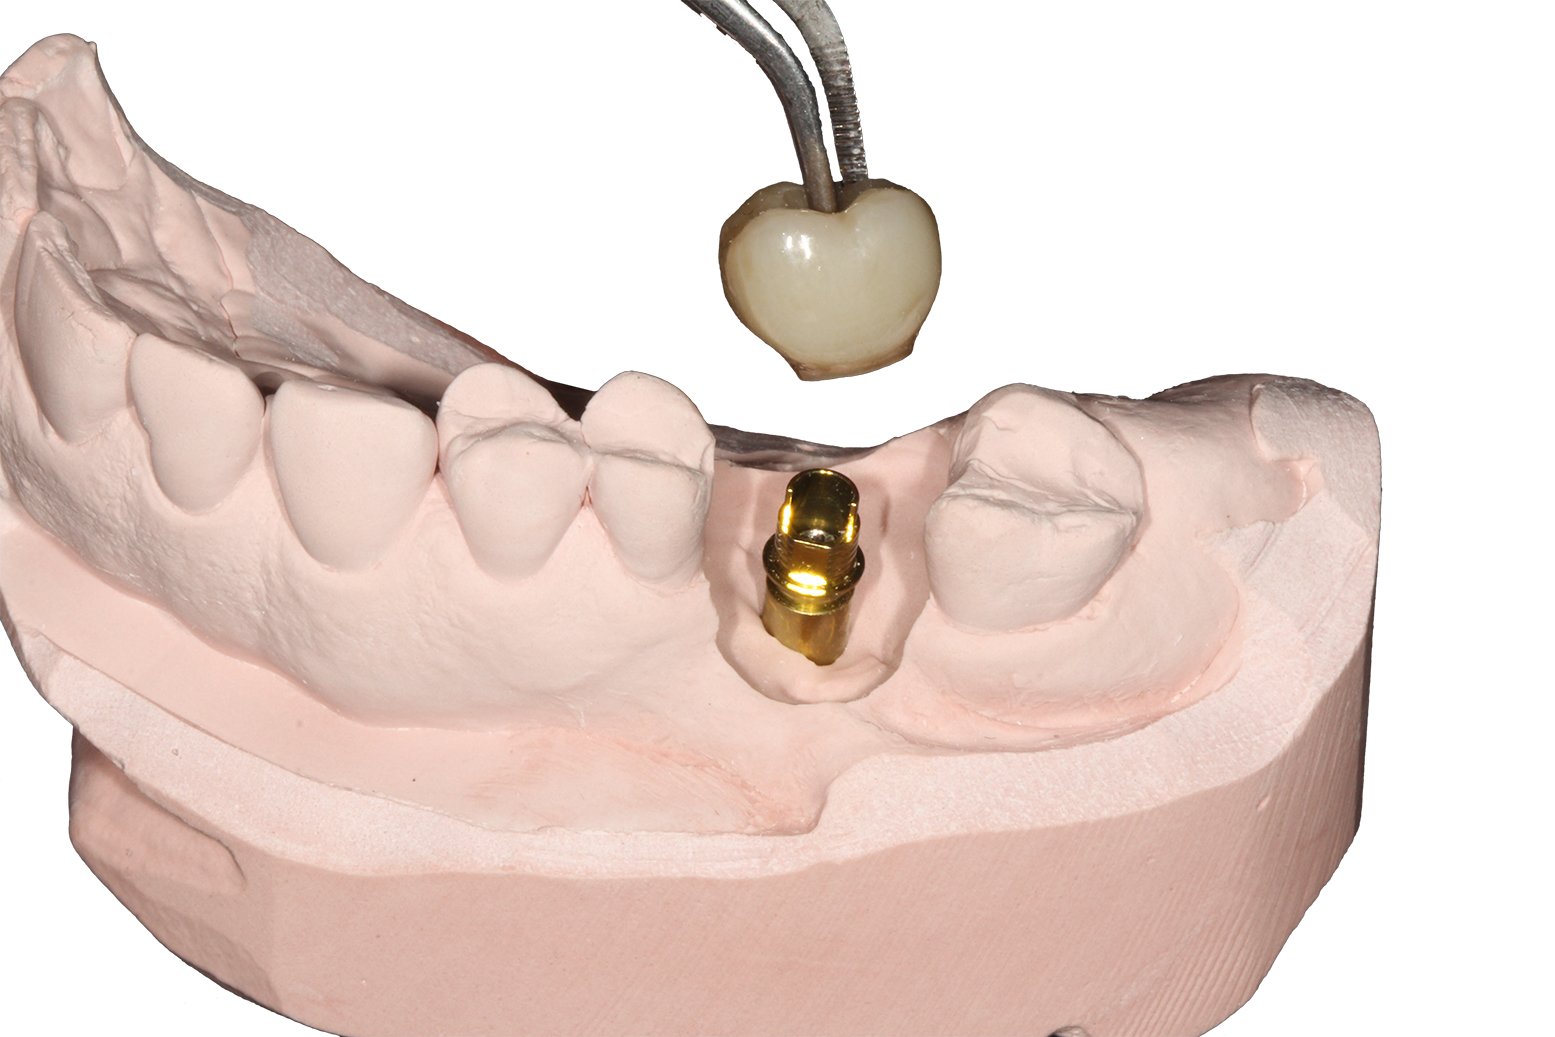 Cementing a crown to a dental model